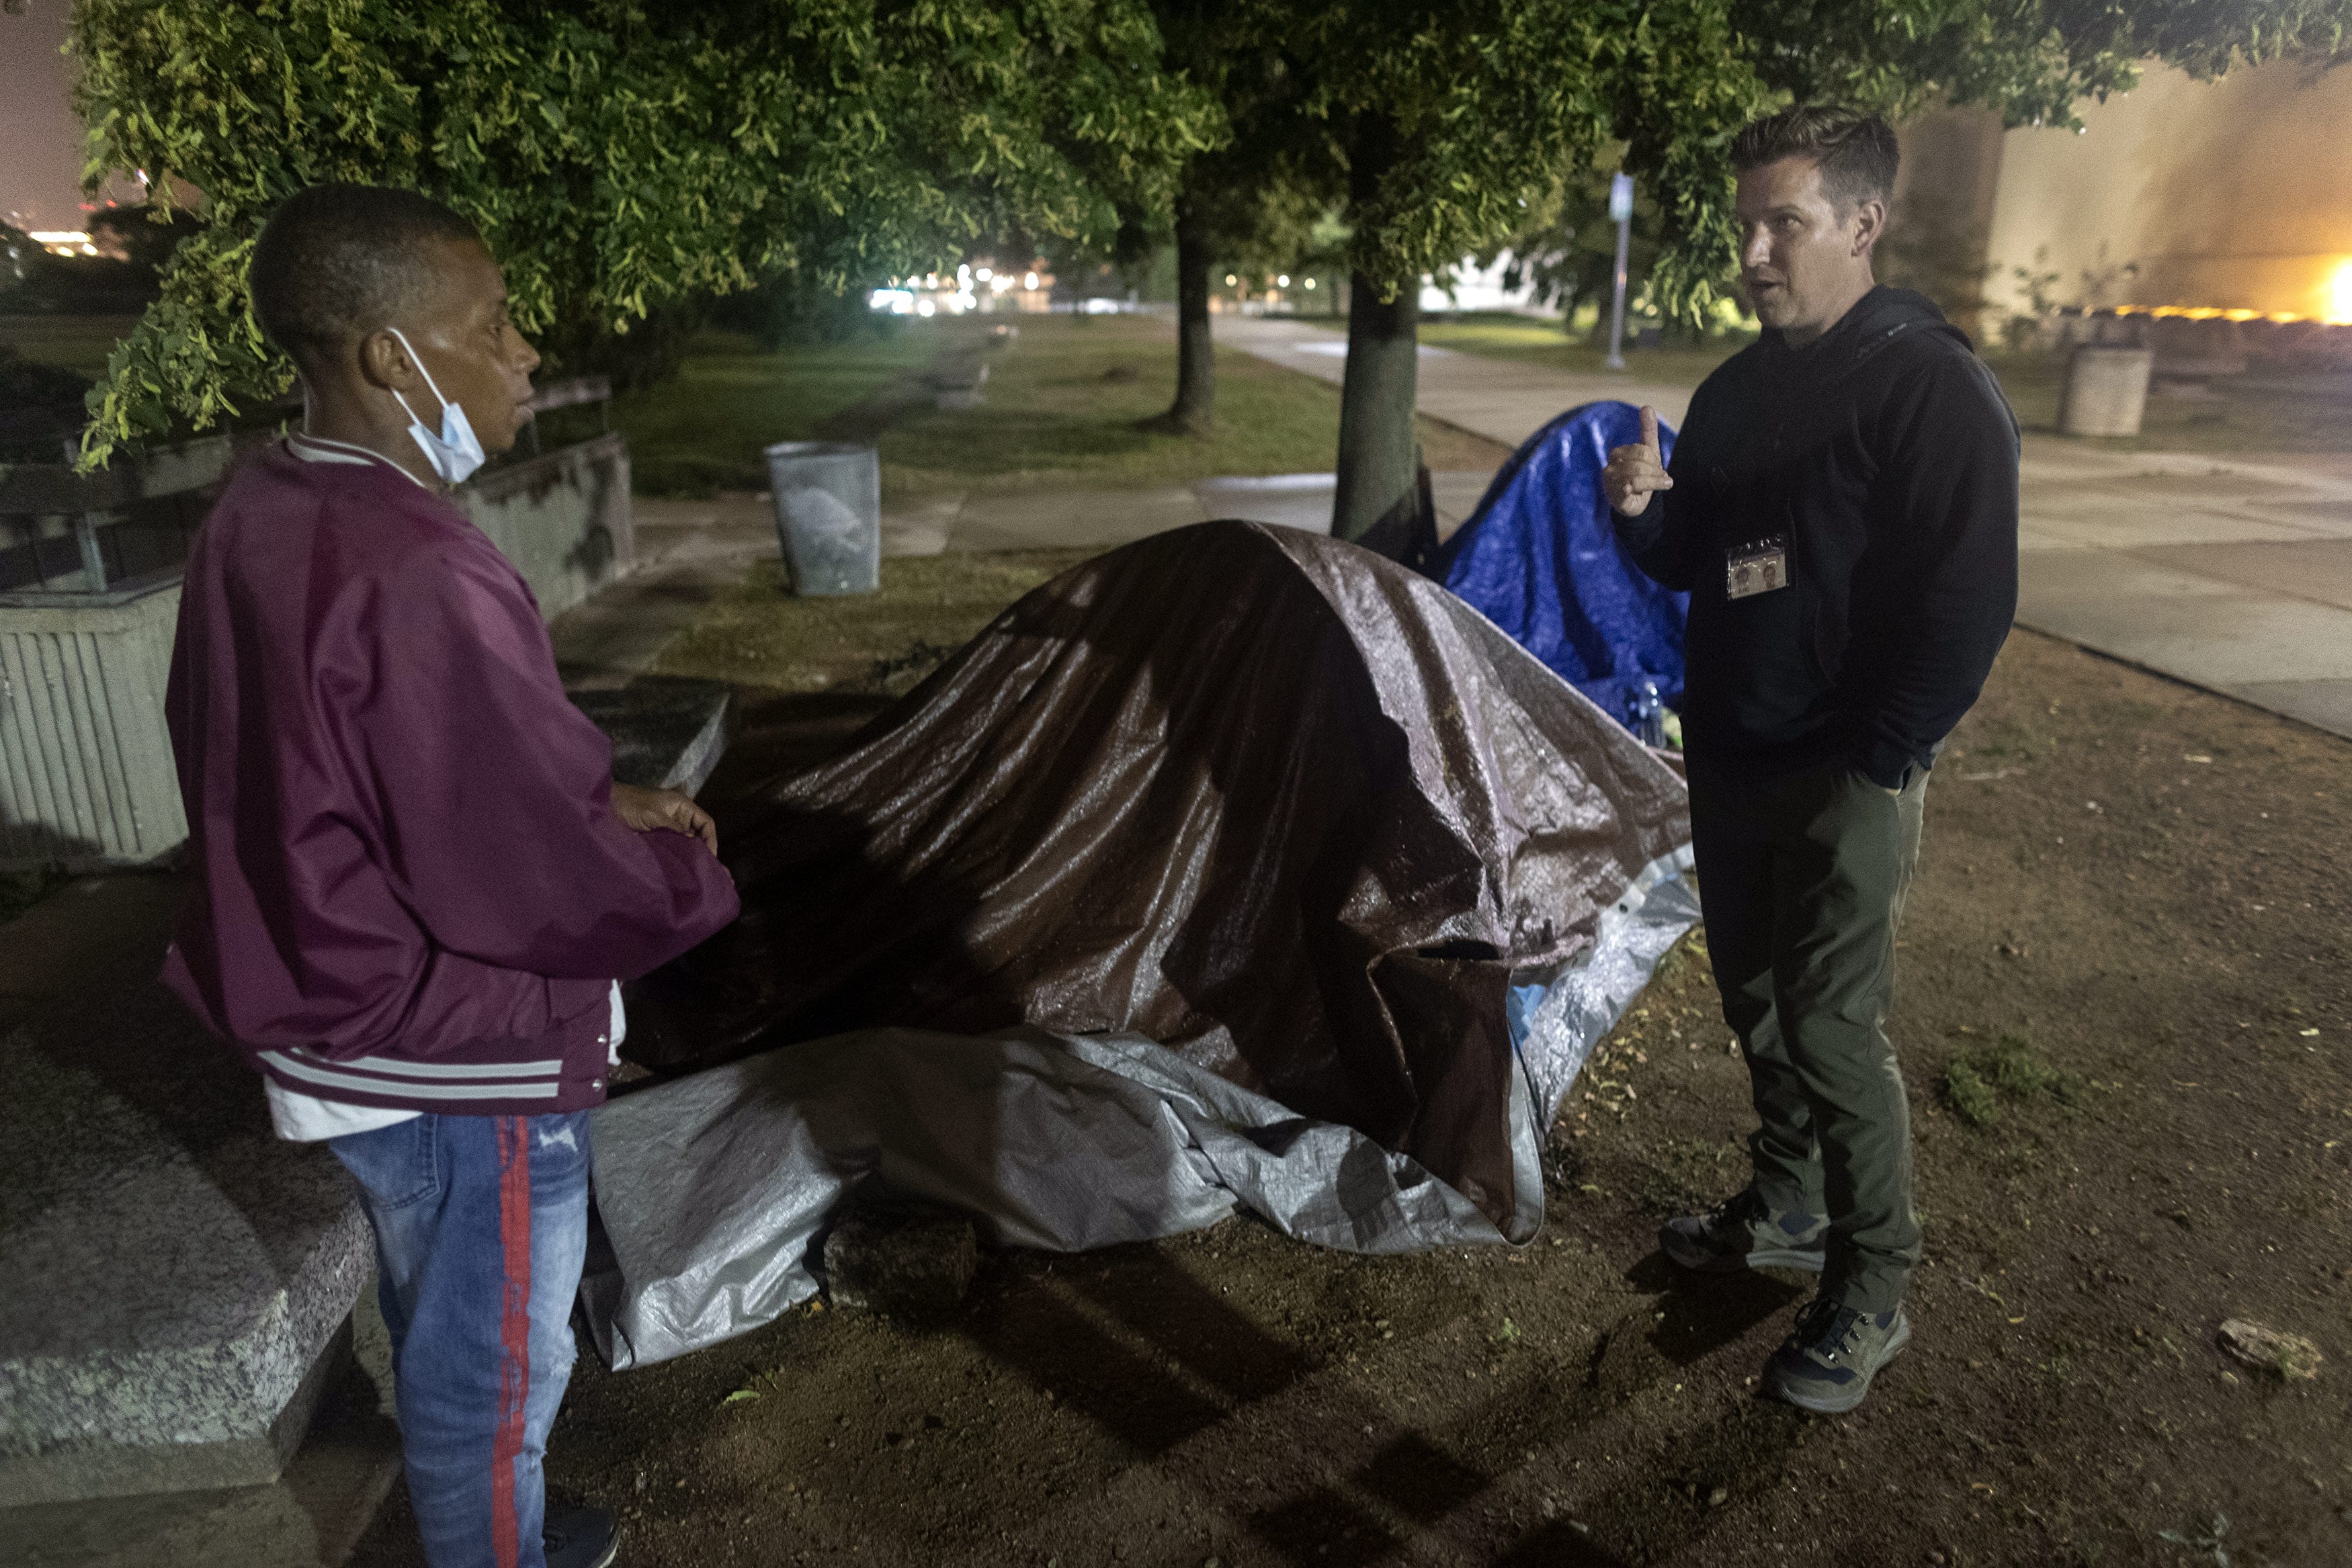 Eric Collins-Dyke, right, talks to Akeem Lawrence about getting a place to live while outside Lawrence's tent in MacArthur Square Park in downtown Milwaukee. Collins-Dyke is assistant administrator of supportive housing and homeless services for the Milwaukee County Housing Division.